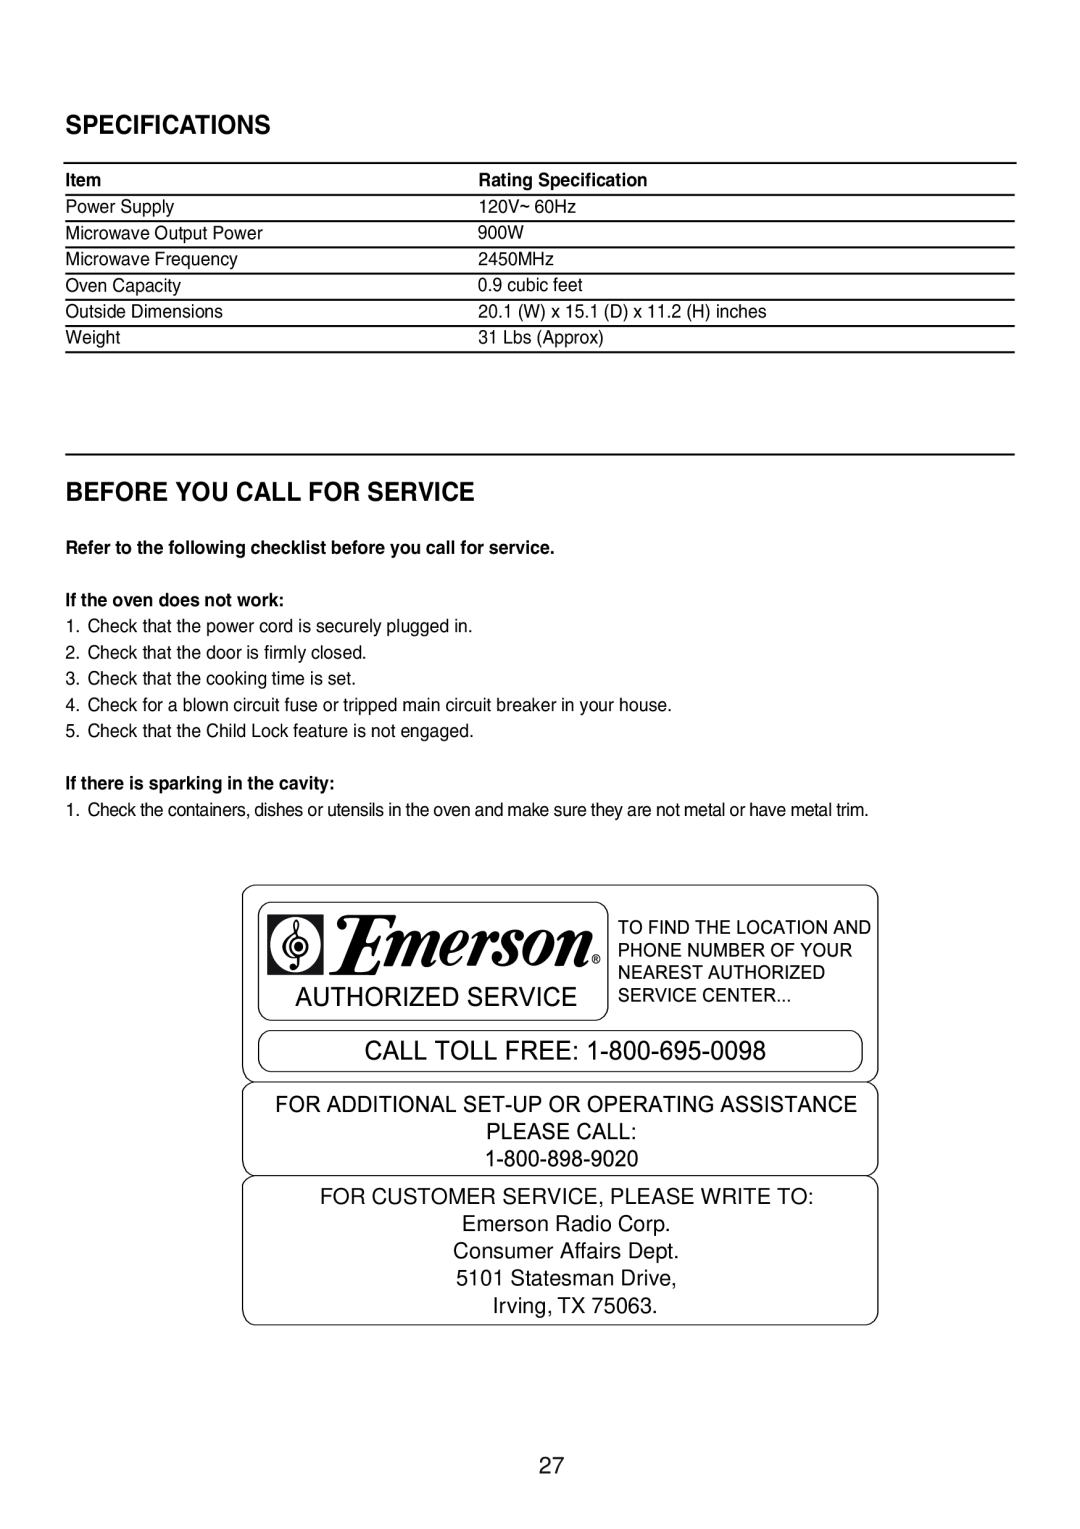 Emerson MW8991SB Specifications, Before You Call For Service, FOR CUSTOMER SERVICE, PLEASE WRITE TO Emerson Radio Corp 